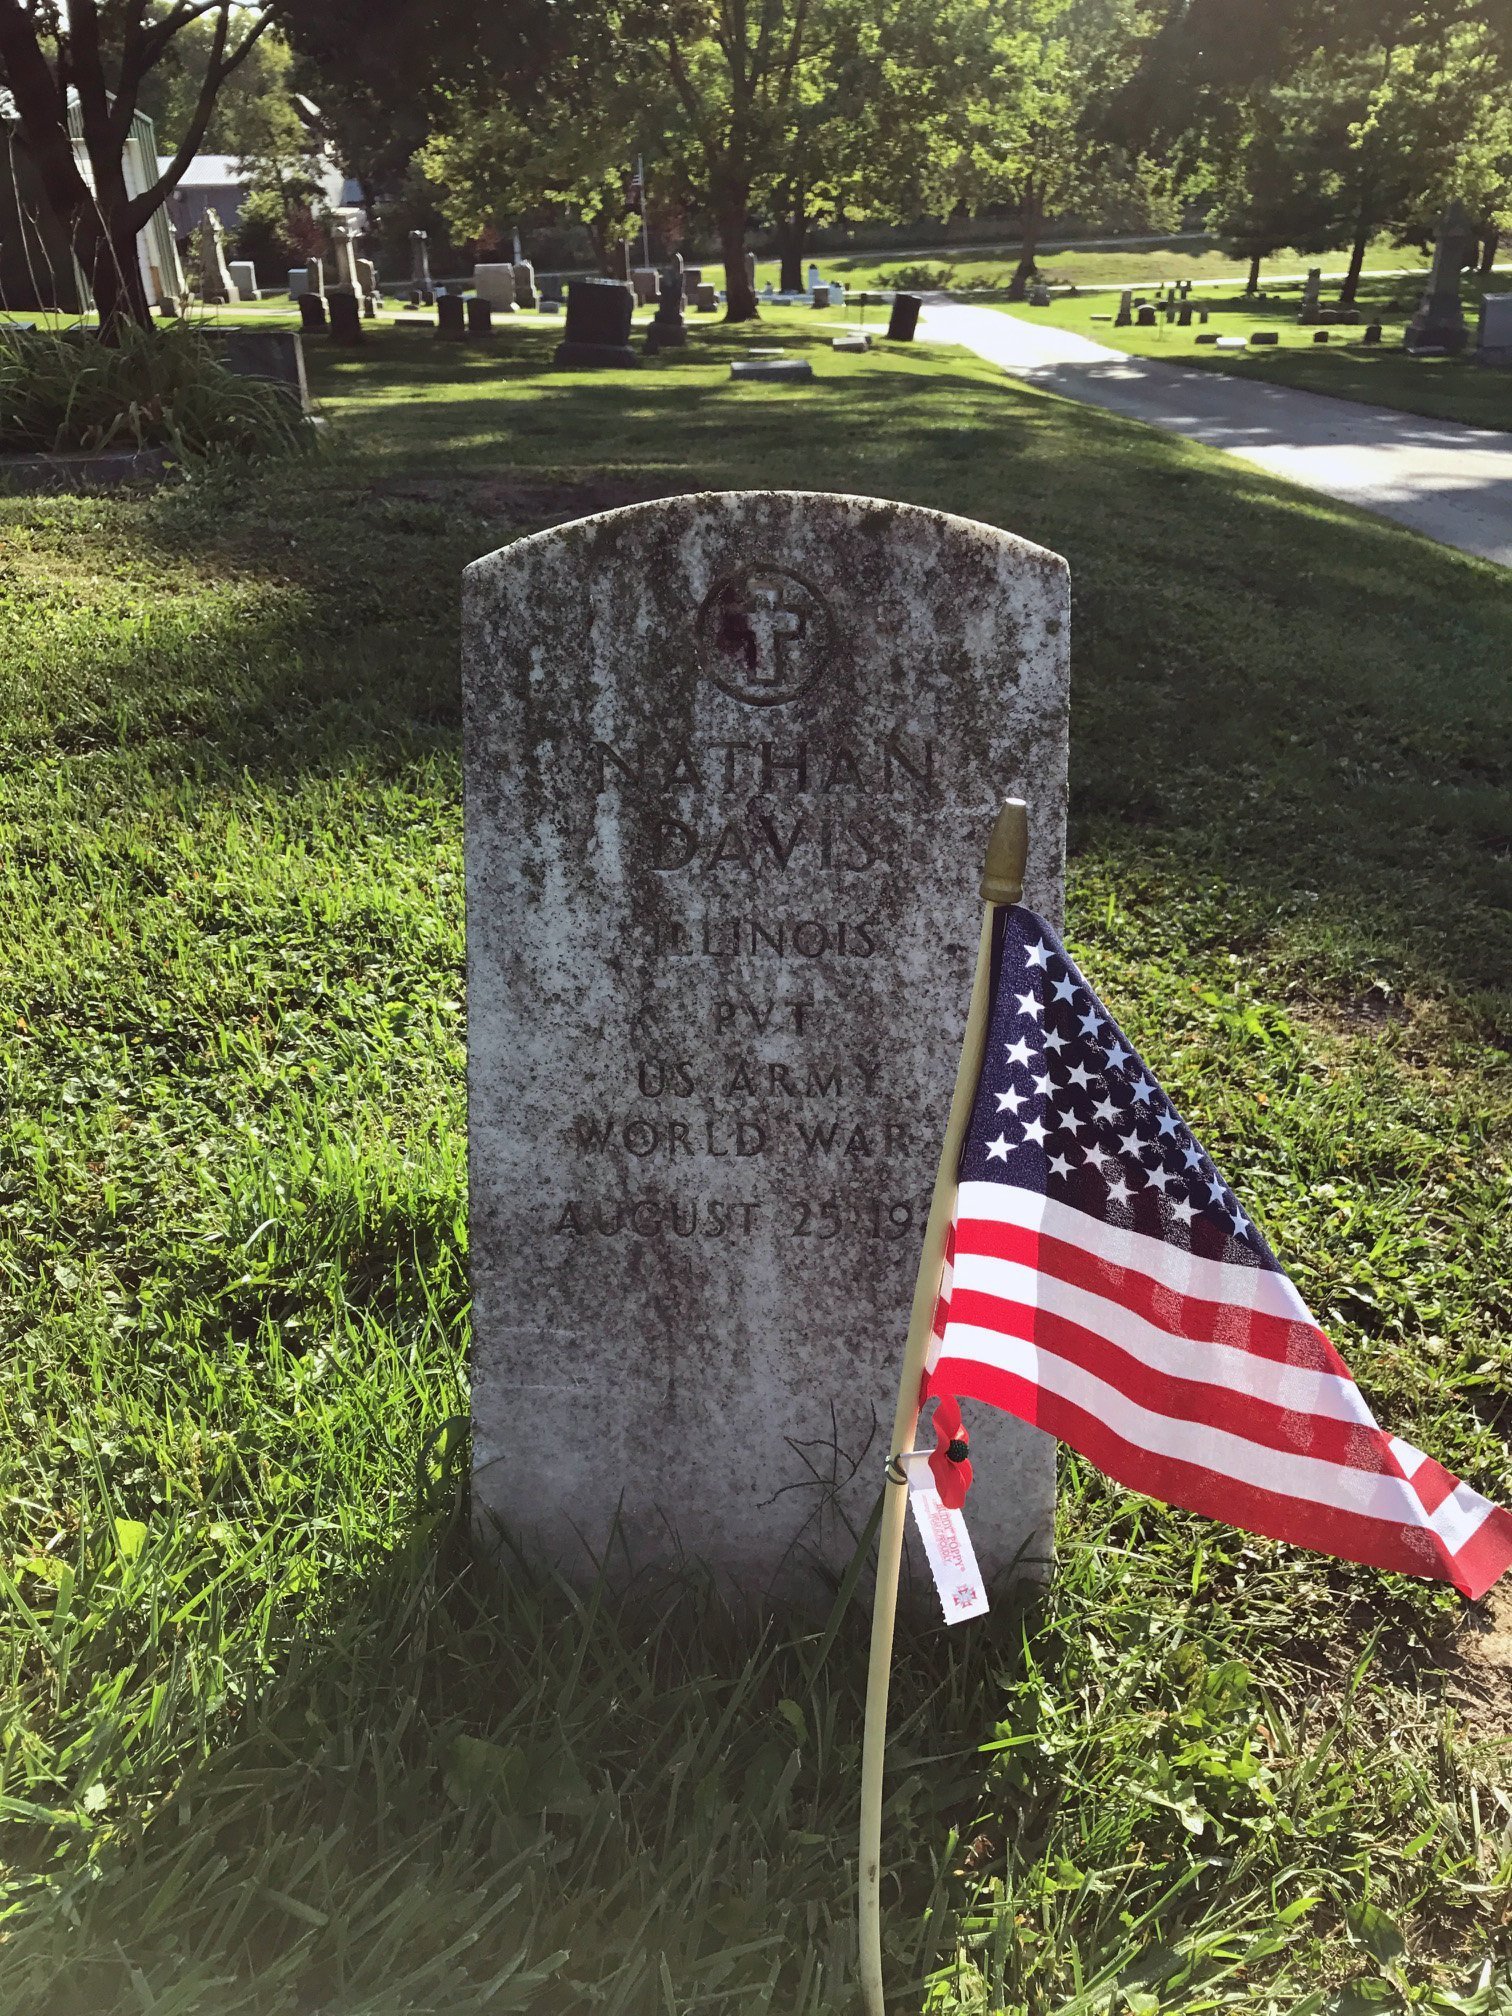 Grave site of Nathan Davis, Pvt Co. M Dev BN No. 2. Grave is marked with a U.S. Flag and poppy at Evergreen Memorial Cemetery, Bloomington, IL.